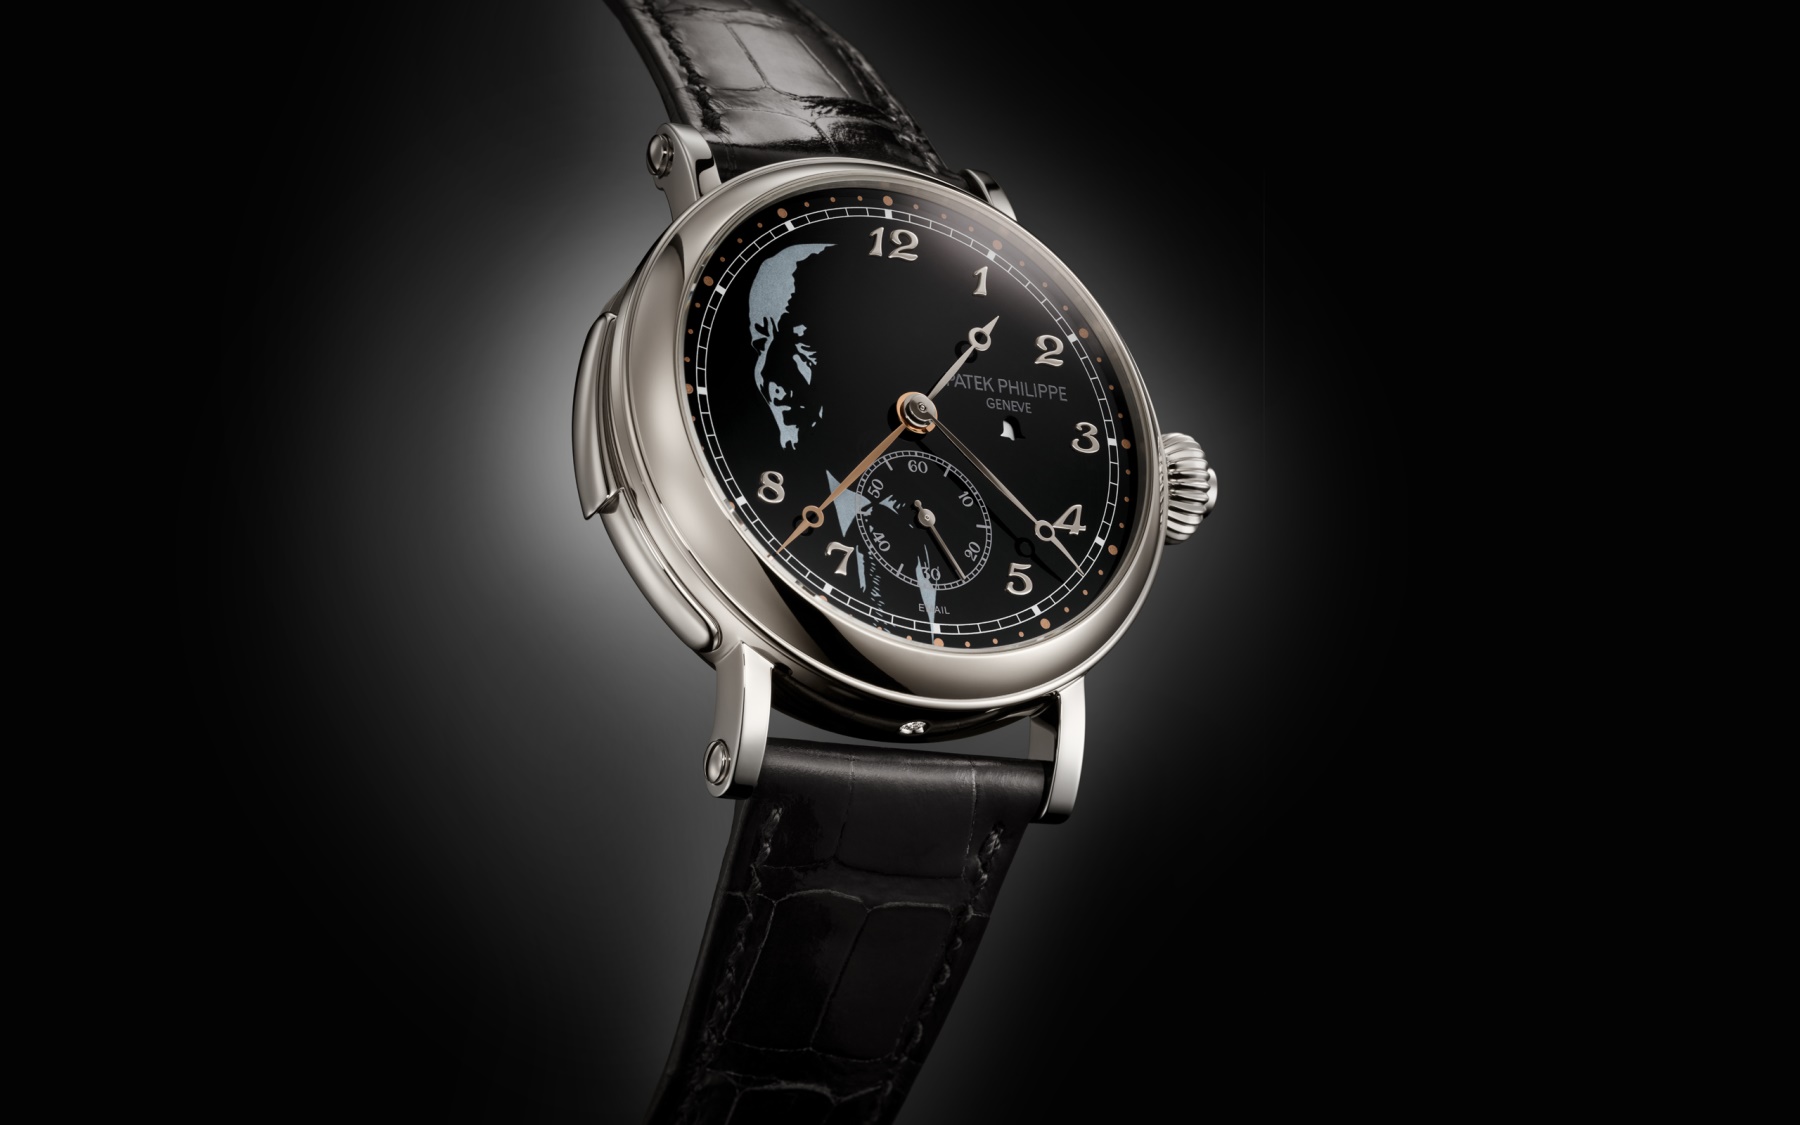 Patek Philippe Minute Repeater Alarm Reference 1938P-001 Philippe Stern